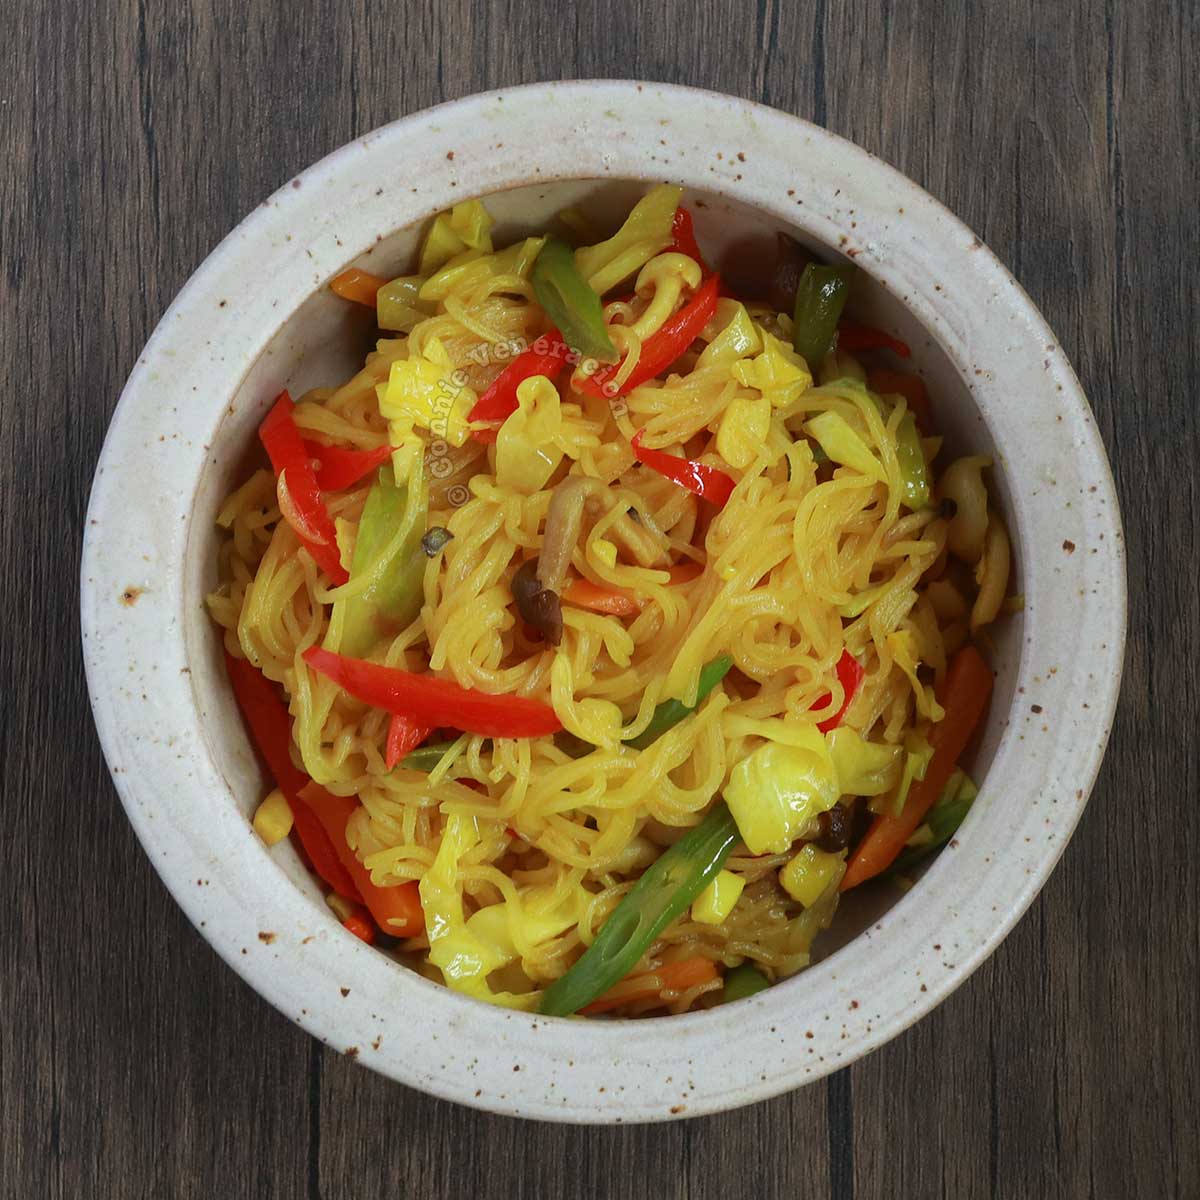 Meatless Singapore noodles (curry bee hoon)